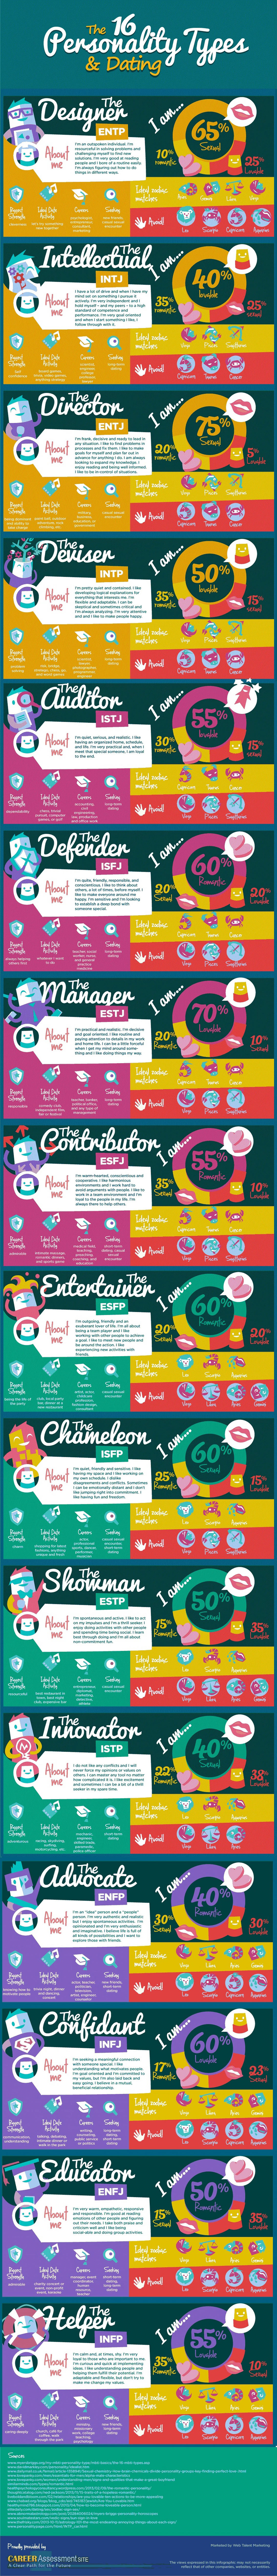 Which Dating Personality Types Women Should Date Infographic